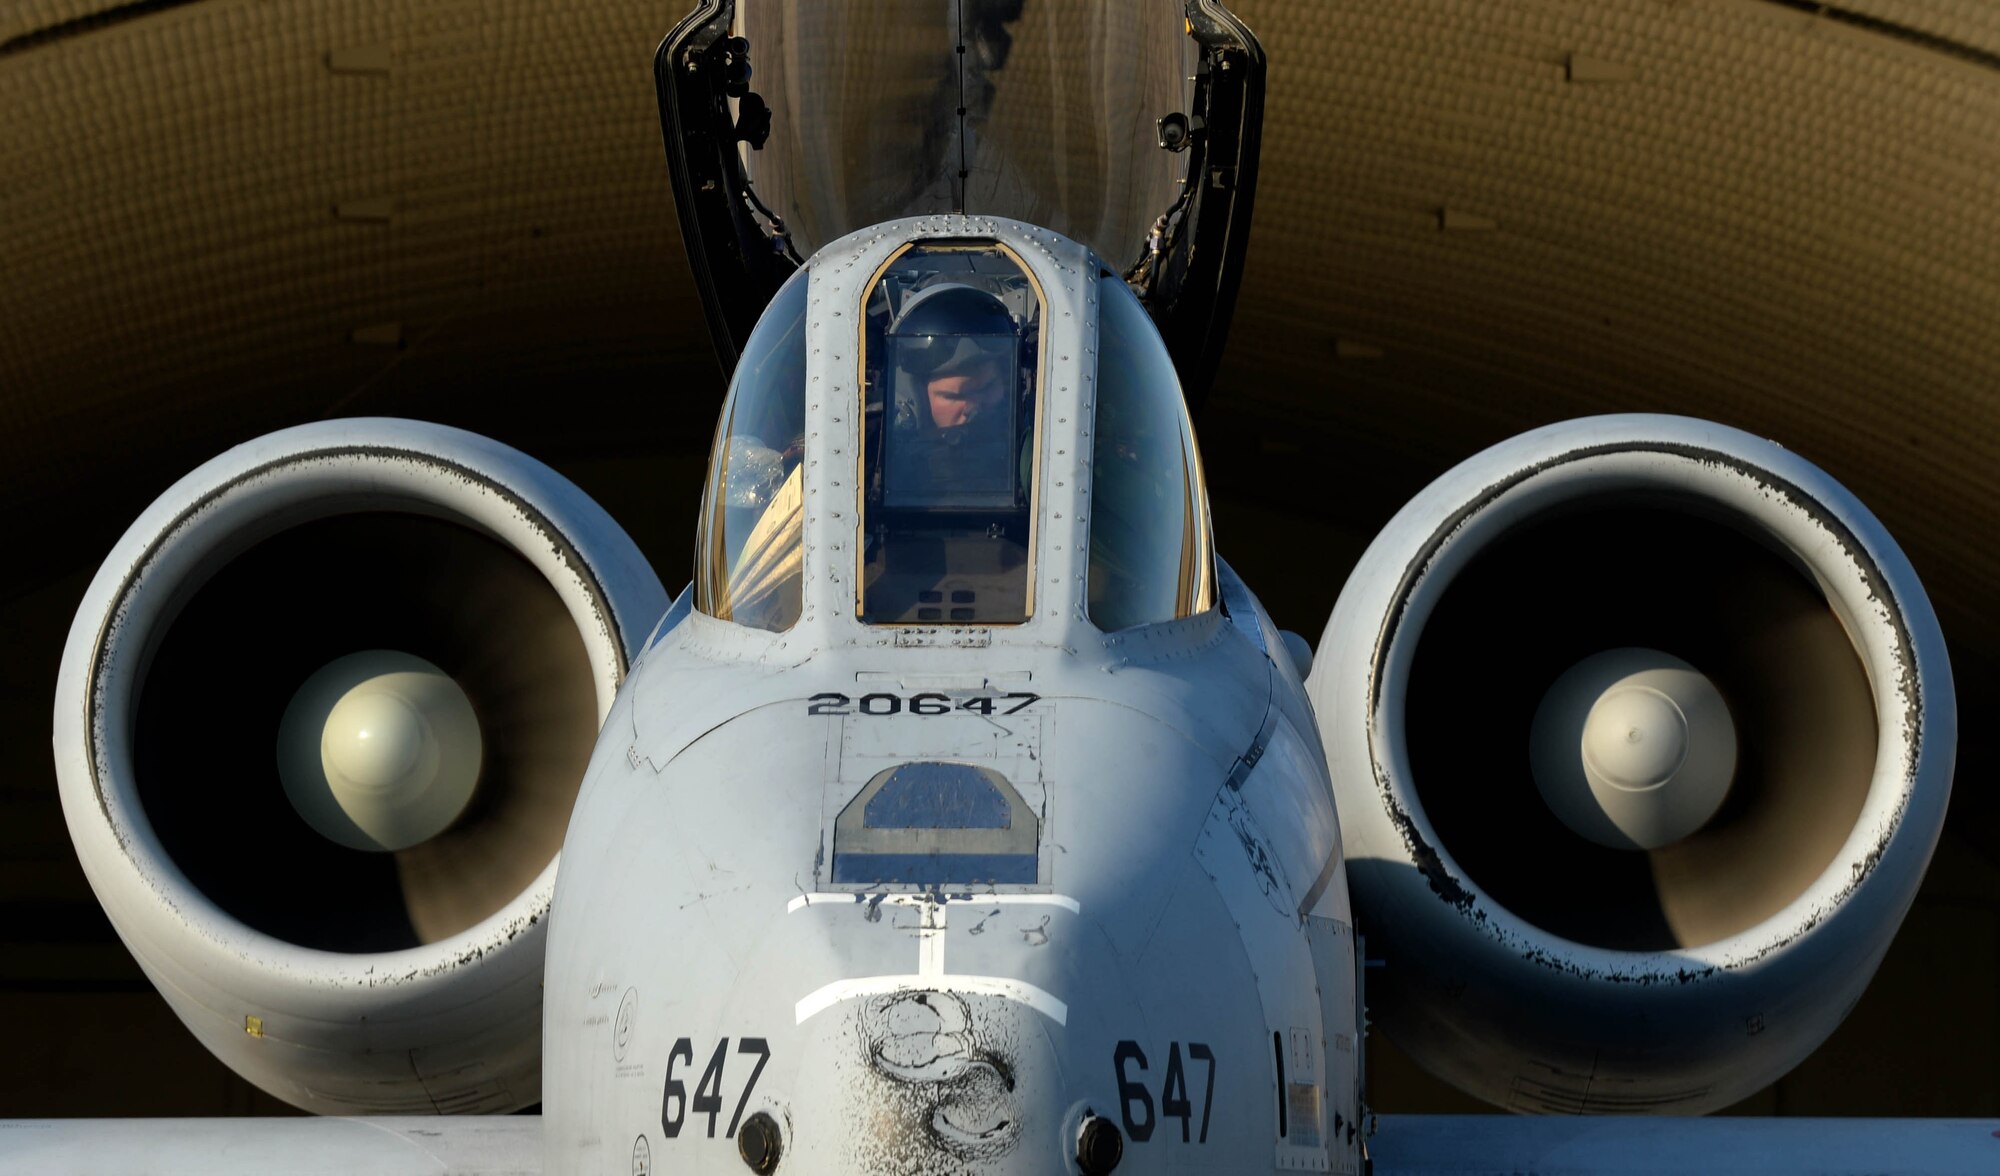 A U.S. Air Force pilot sits in an A-10 Thunderbolt II aircraft assigned to the 354th Expeditionary Fighter Squadron on the flight line at Spangdahlem Air Base, Germany, Feb. 13, 2015. The A-10s deployed as part of a theater security package in support of Operation Atlantic Resolve. Operation Atlantic Resolve is a demonstration of U.S. European Command and United States Air Forces in Europe's continued commitment to the collective security of the North Atlantic Treaty Organization and dedication to the enduring peace and stability in the region. (U.S. Air Force photo by Airman 1st Class Timothy Kim/Released)